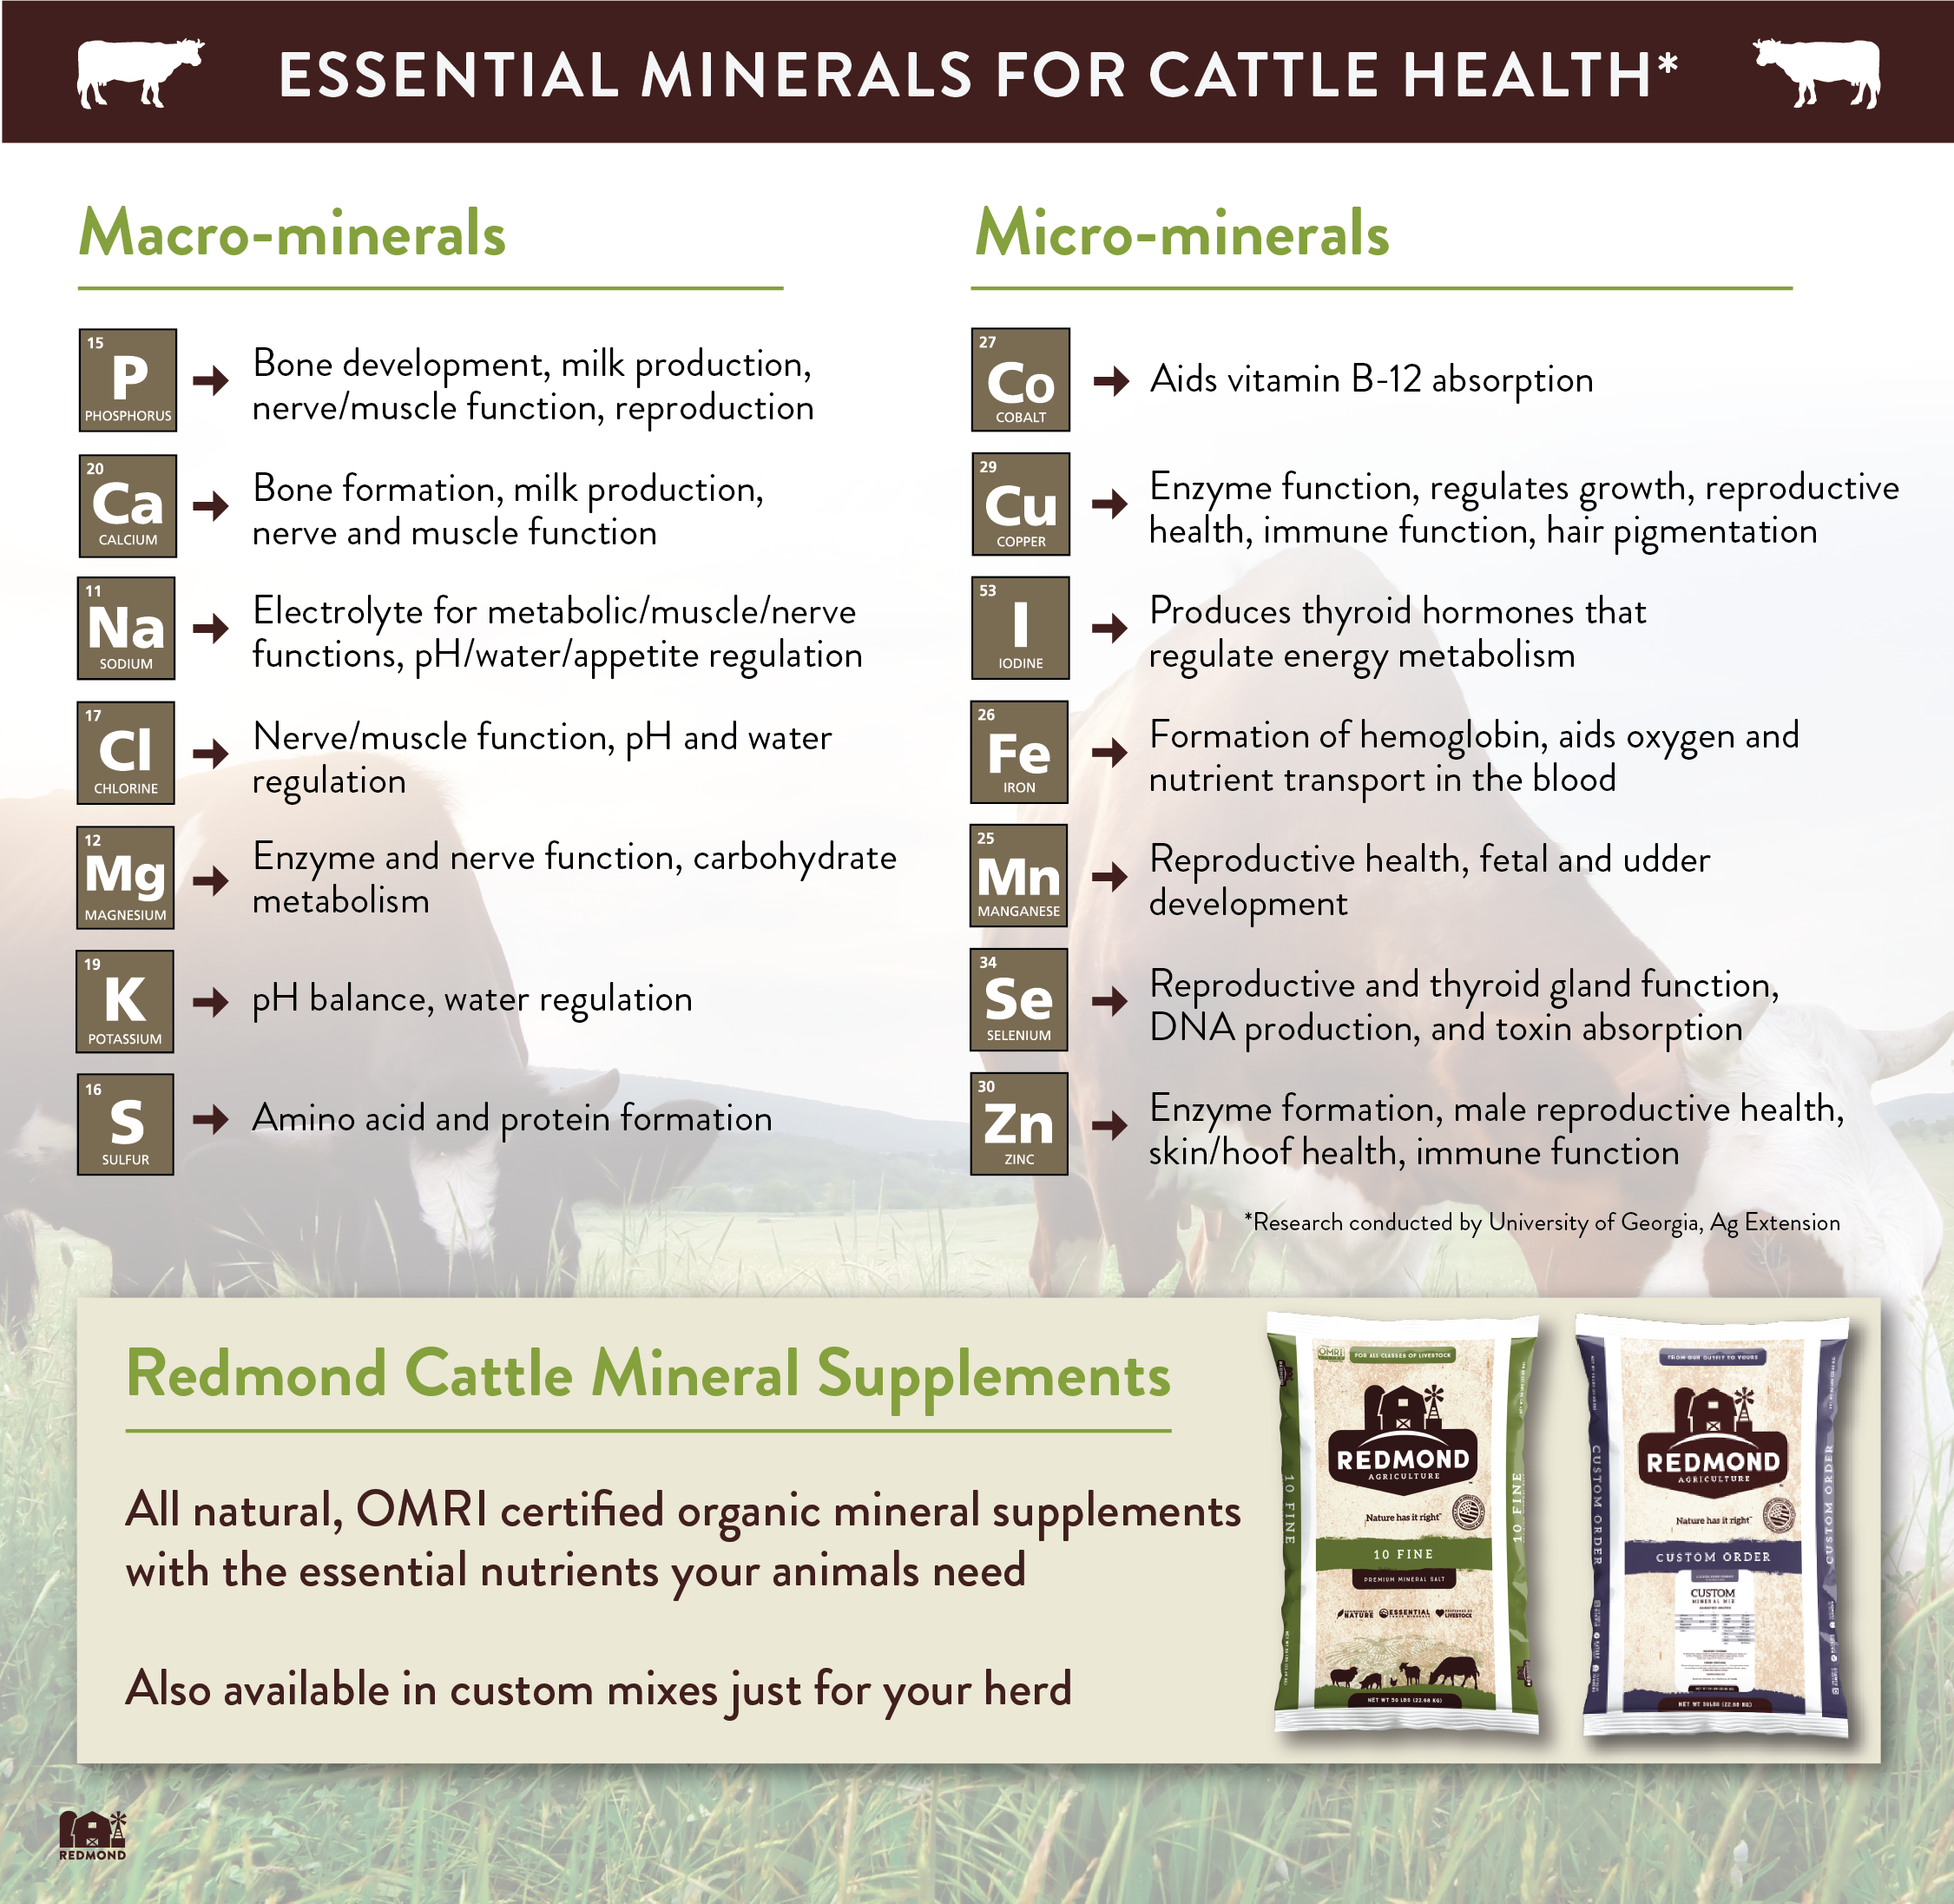 Essential minerals for cattle